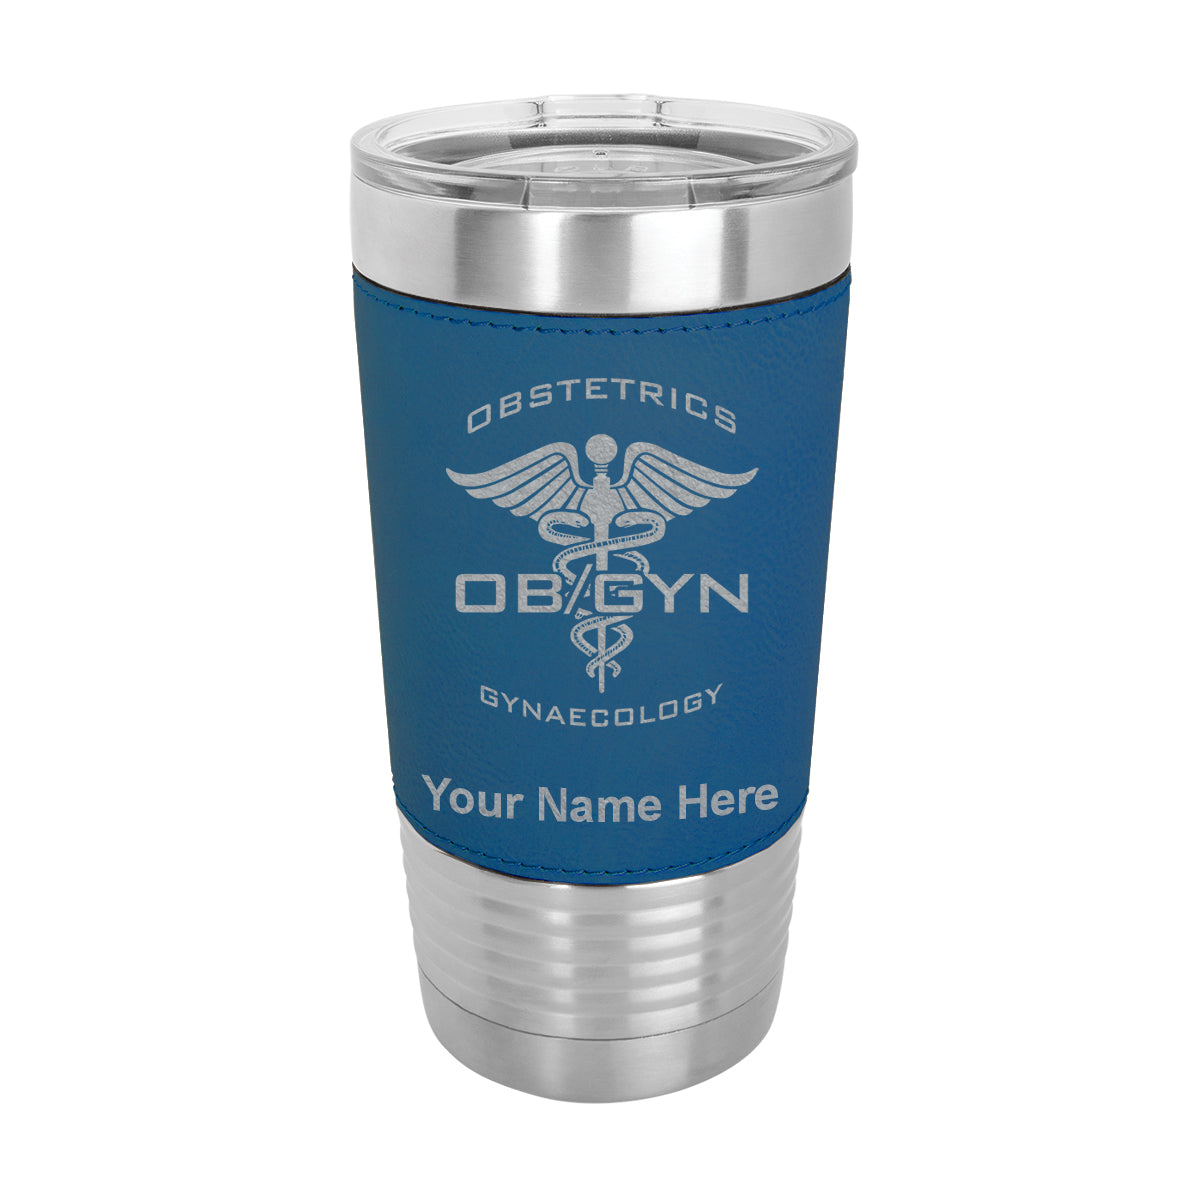 20oz Faux Leather Tumbler Mug, OBGYN Obstetrics and Gynaecology, Personalized Engraving Included - LaserGram Custom Engraved Gifts